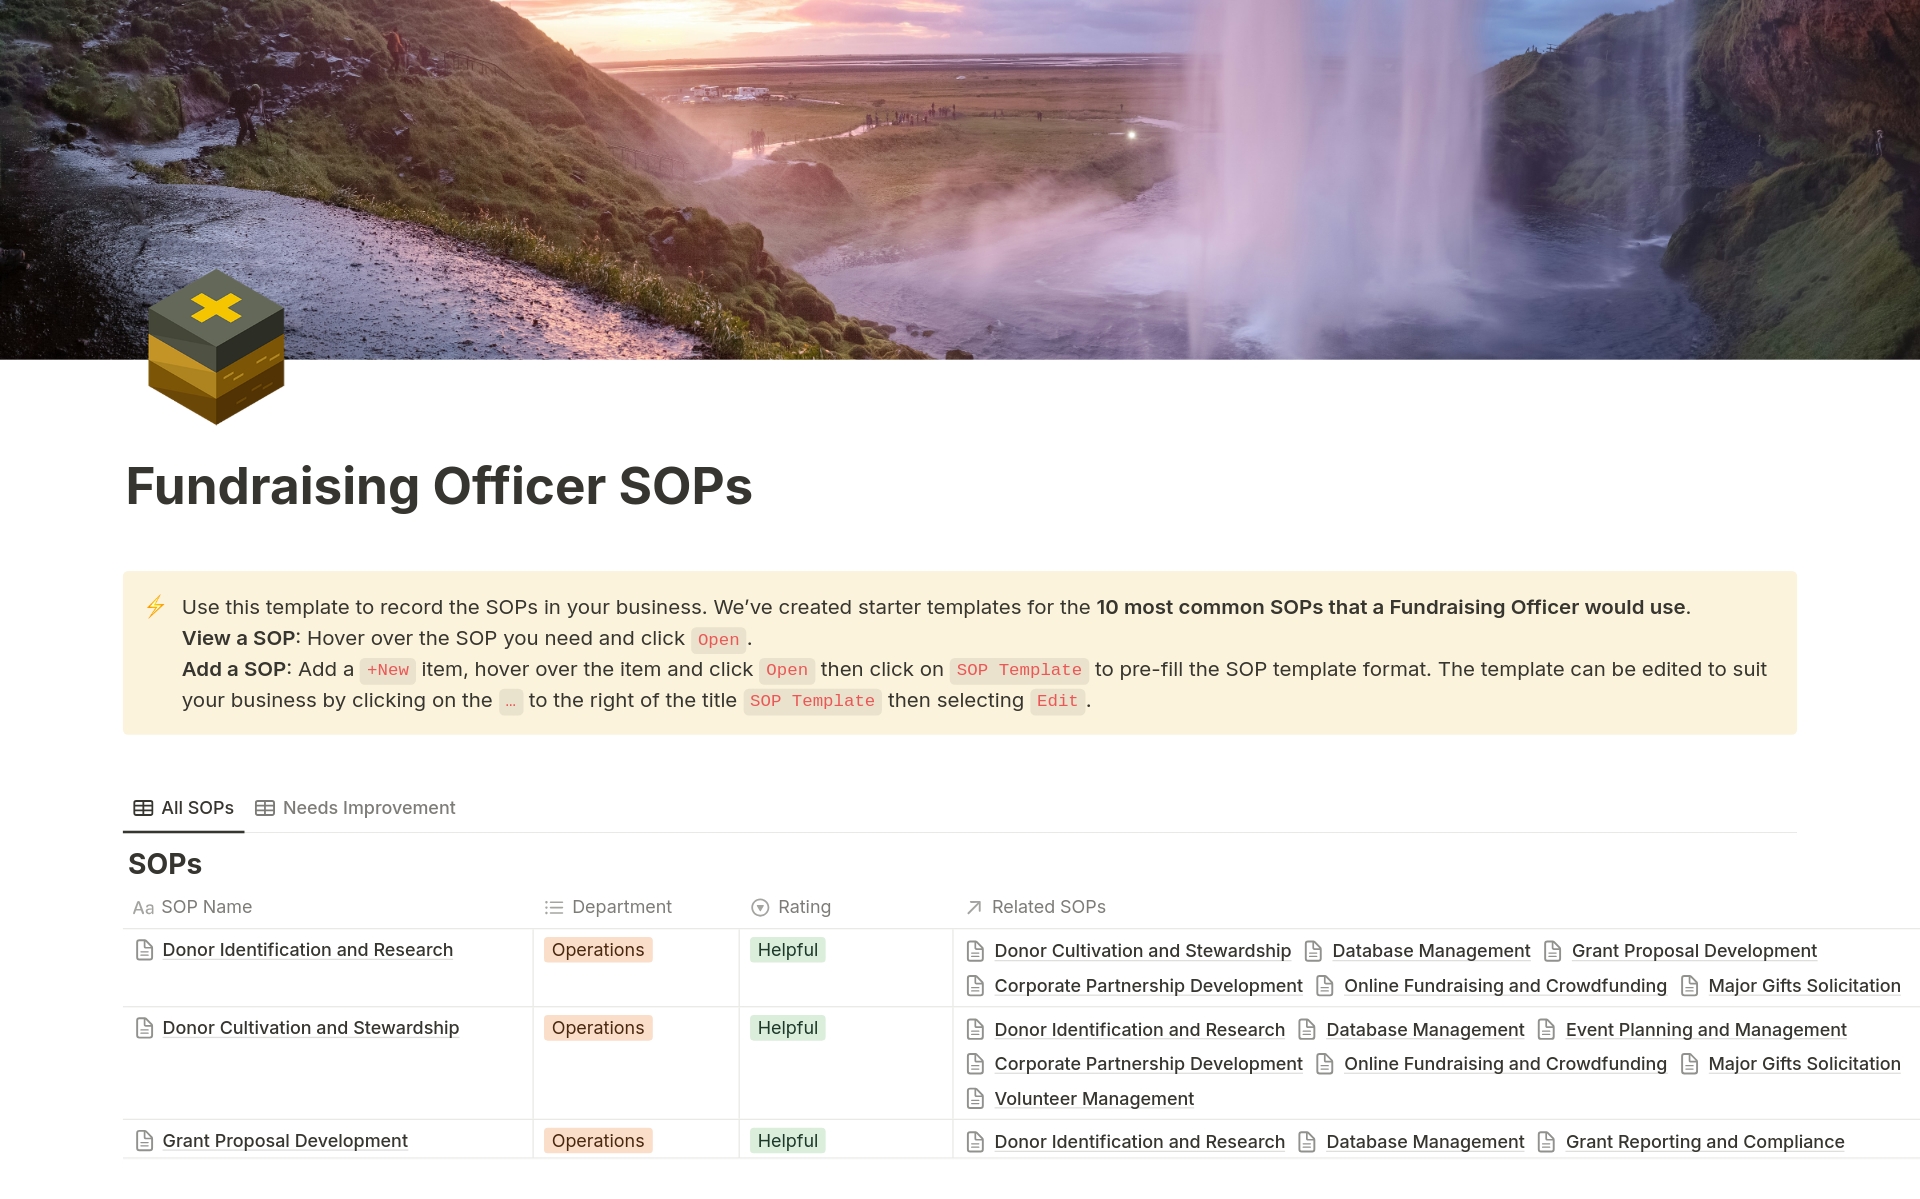 This template contains standard operating procedures (SOPs) for various fundraising activities. It covers donor identification and research, cultivation and stewardship + more. Includes 20+ pages of best practice SOPs to save you 10+ hours of research.